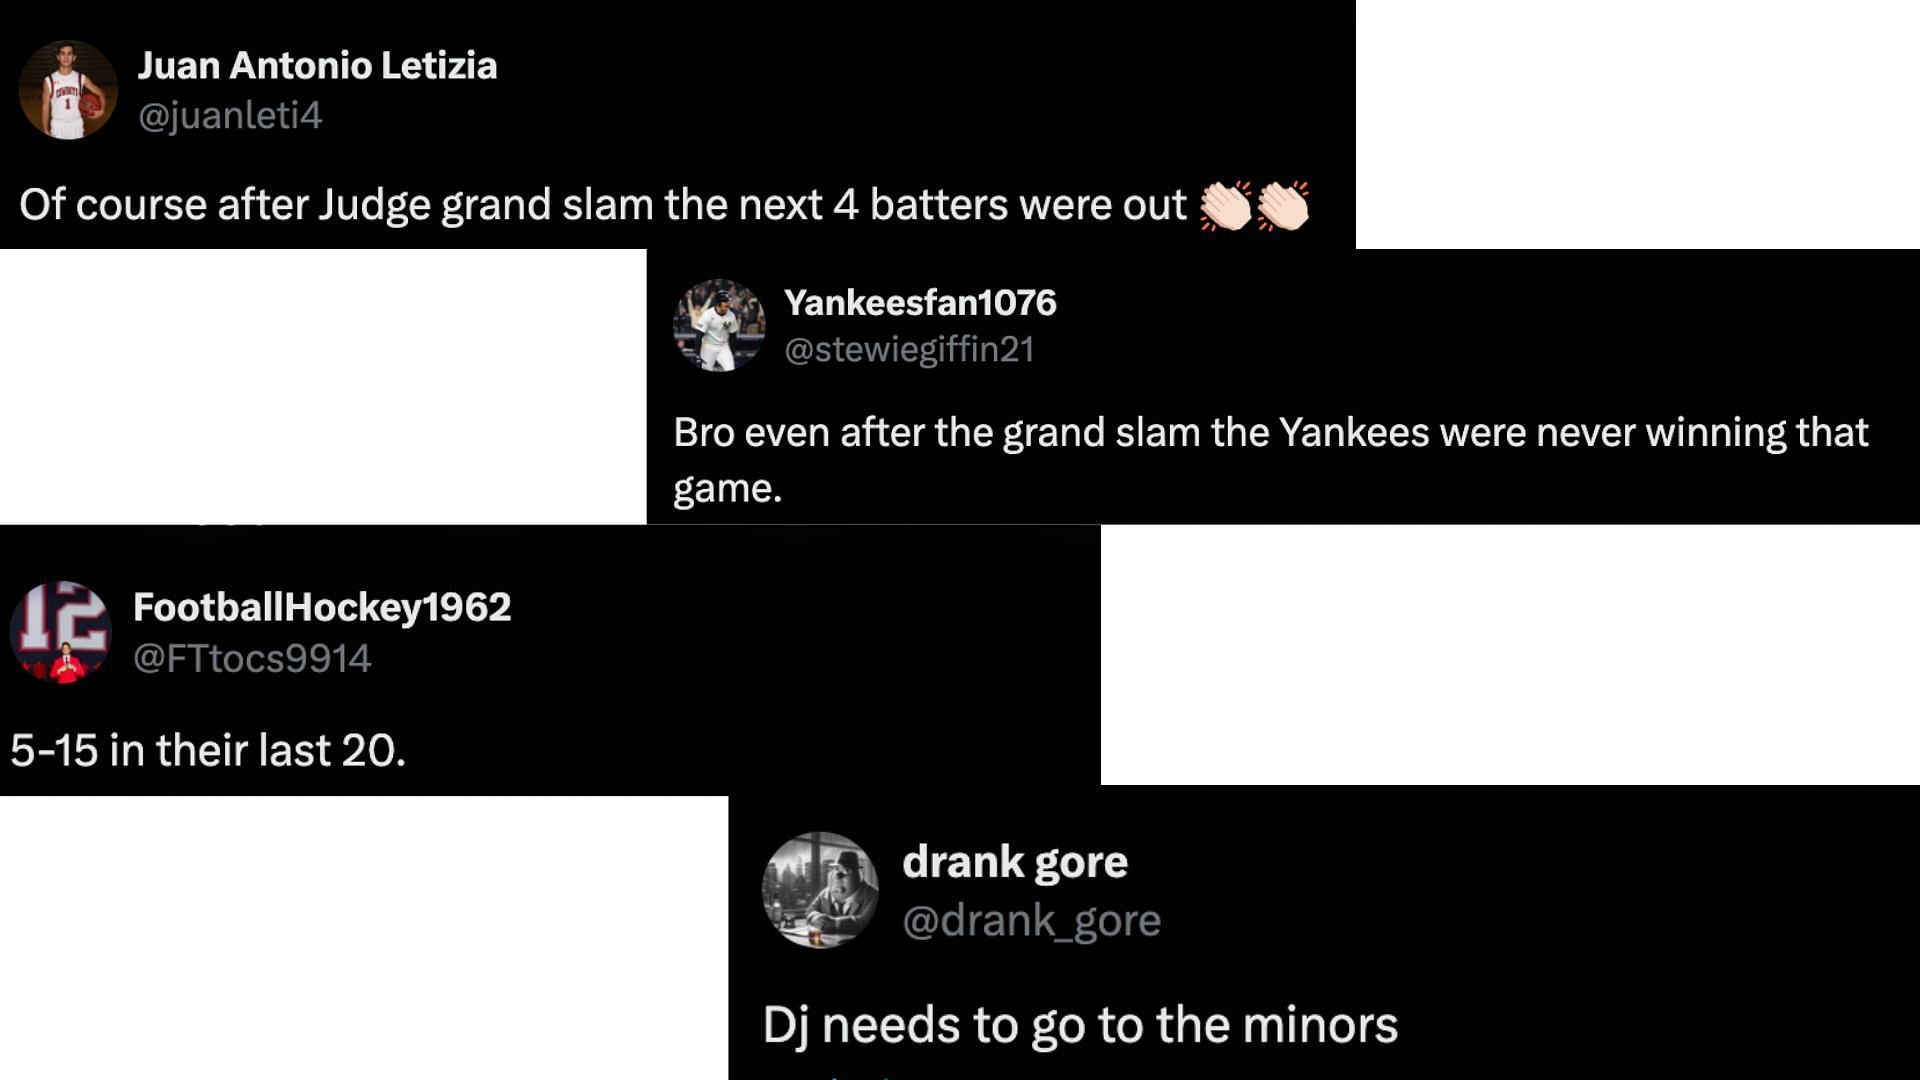 &quot;Of course after Judge grand slam the next four batters were out.&quot; - Added another fan.